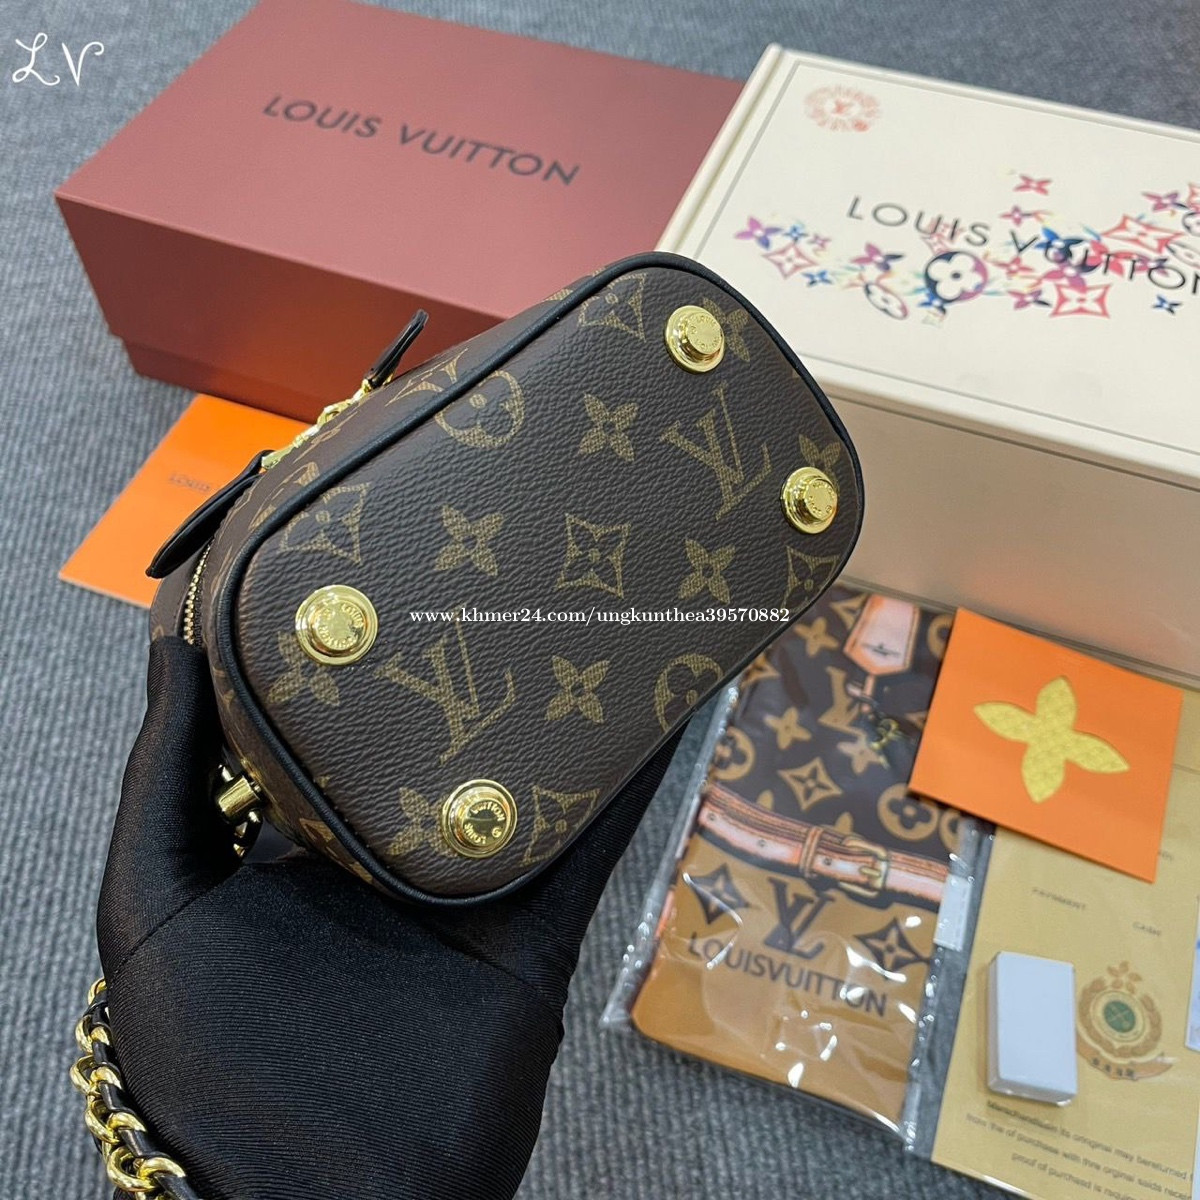 6 Louis Vuitton Crossbody Bags Worth Getting 👜 